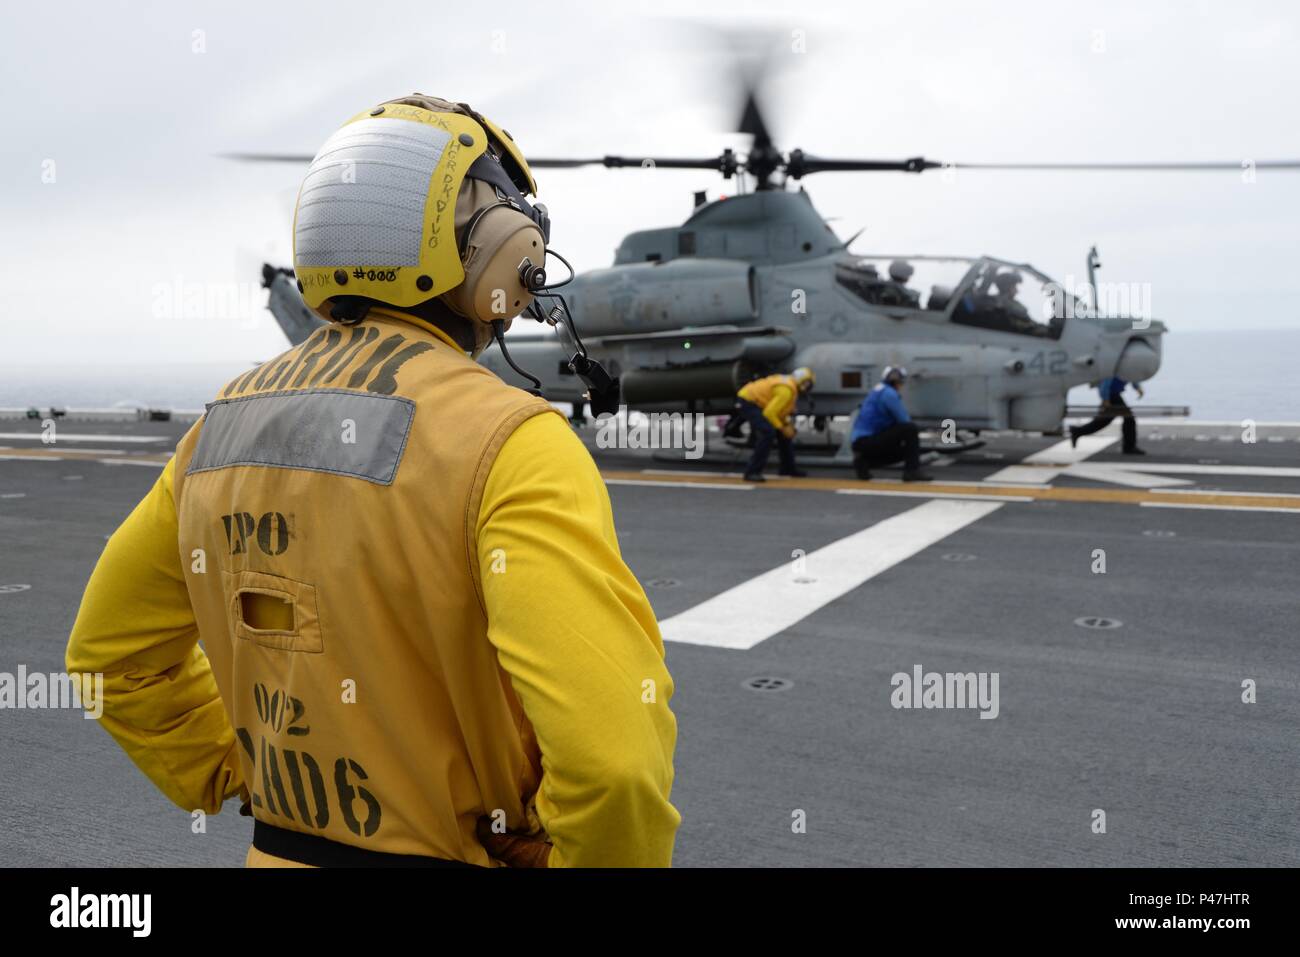 170612-N-YG104-004  PHILIPPINE SEA (June 12, 2017) Aviation Boatswains Mate 2nd Class Jessie Harris looks on as fellow Sailors chain down an AH-1 Super Cobra helicopter aboard the amphibious assault ship USS Bonhomme Richard (LHD 6). Bonhomme Richard is the flagship of the Bonhomme Richard Expeditionary Strike Group, which is on a routine deployment, operating in the Indo-Asia-Pacific region to serve as a forward-capability for any type of contingency. (U.S. Navy photo by Mass Communication Specialist 2nd Class Sarah Villegas/Released Stock Photo